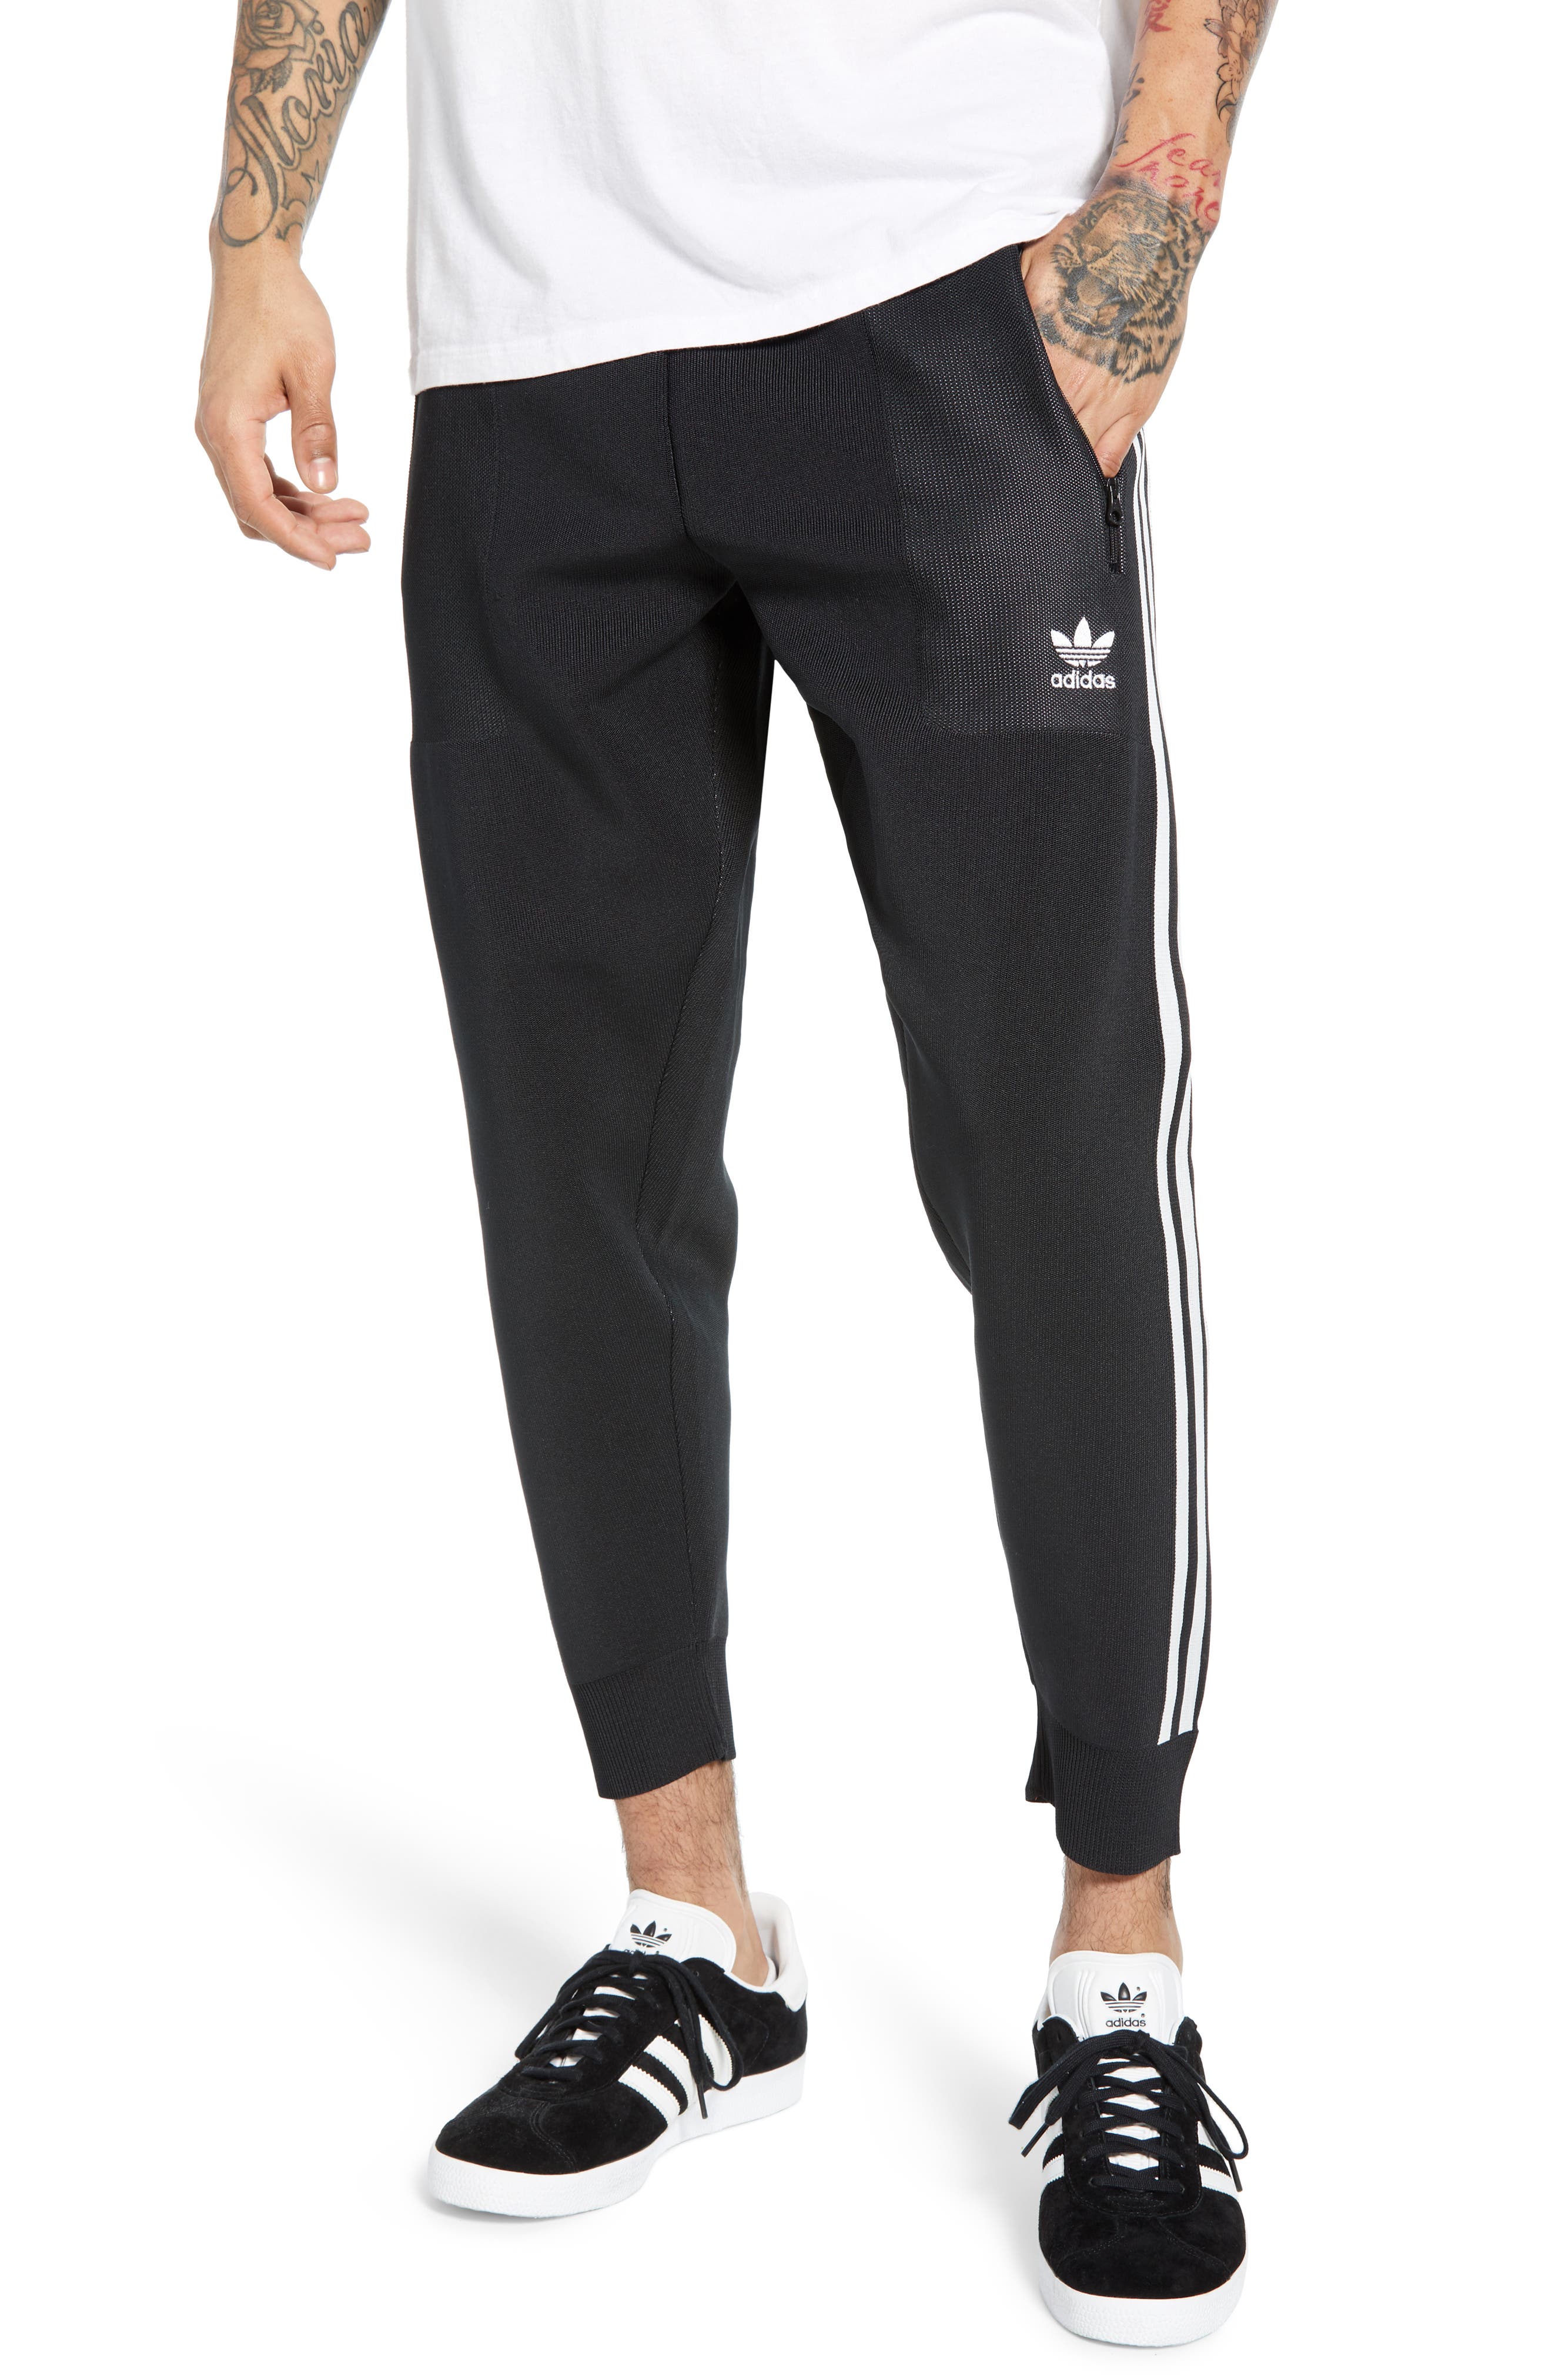 adidas knitted track pants